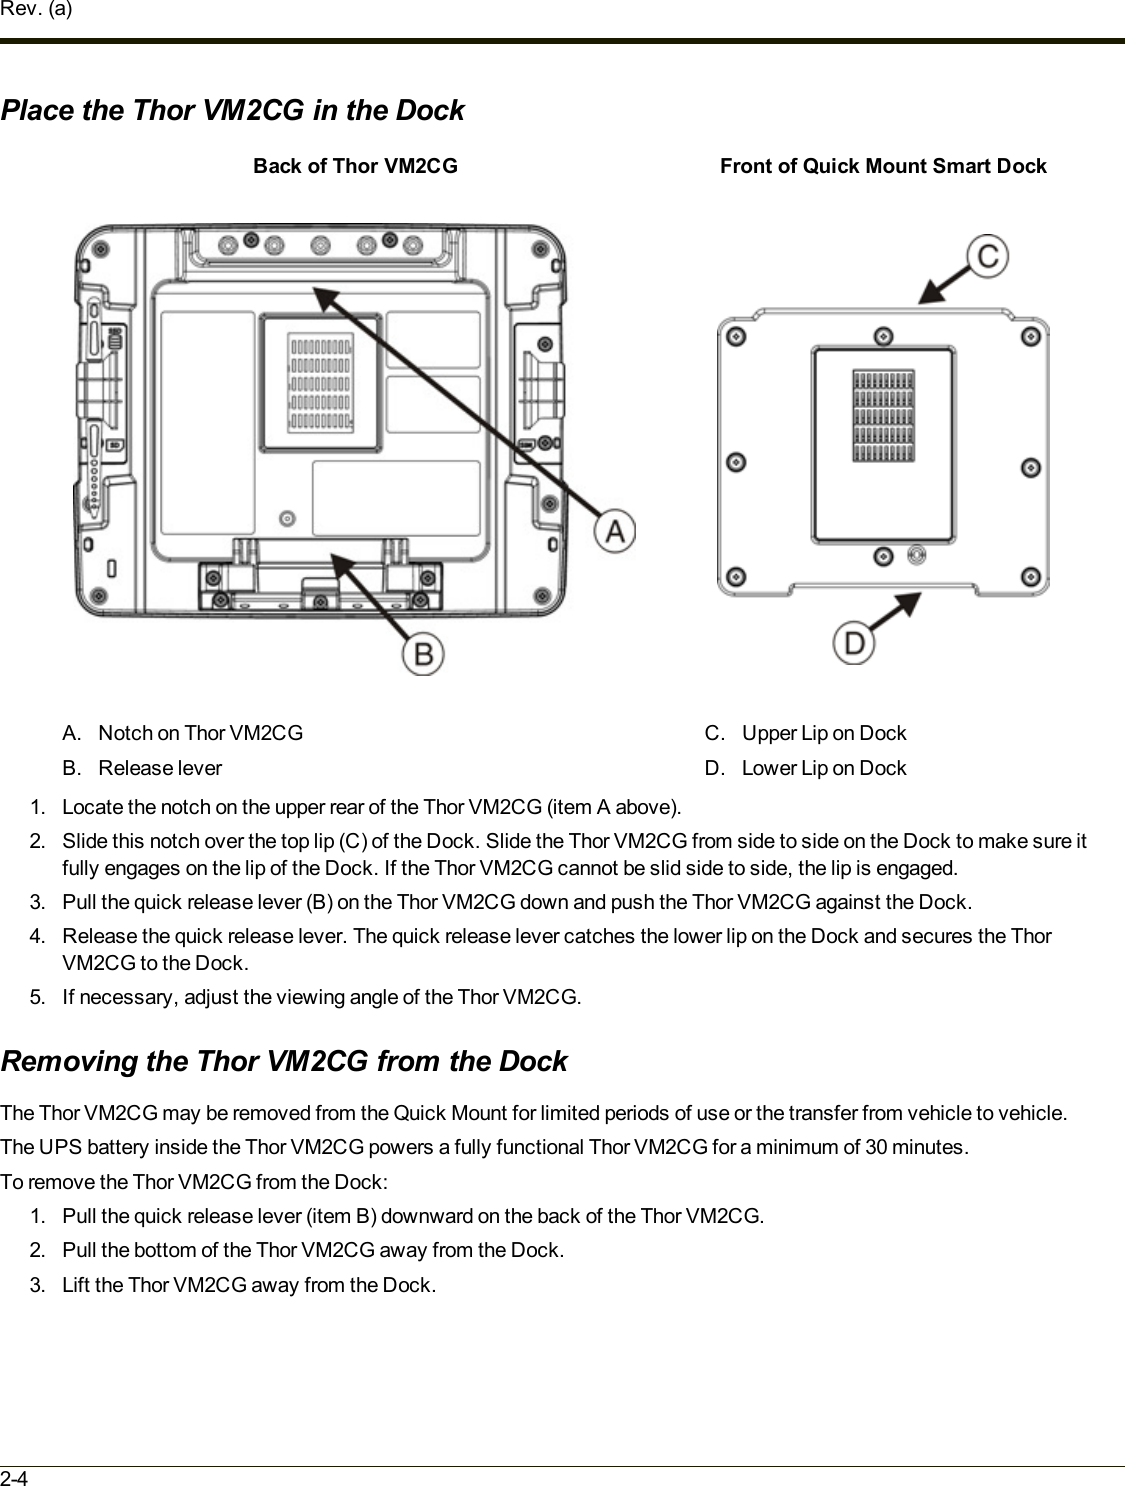 Rev. (a)Place the Thor VM2CG in the DockBack of Thor VM2CG Front of Quick Mount Smart DockA. Notch on Thor VM2CGB. Release leverC. Upper Lip on DockD. Lower Lip on Dock1. Locate the notch on the upper rear of the Thor VM2CG (item A above).2. Slide this notch over the top lip (C)of the Dock. Slide the Thor VM2CG from side to side on the Dock to make sure itfully engages on the lip of the Dock. If the Thor VM2CG cannot be slid side to side, the lip is engaged.3. Pull the quick release lever (B) on the Thor VM2CG down and push the Thor VM2CG against the Dock.4. Release the quick release lever. The quick release lever catches the lower lip on the Dock and secures the ThorVM2CG to the Dock.5. If necessary, adjust the viewing angle of the Thor VM2CG.Removing the Thor VM2CG from the DockThe Thor VM2CG may be removed from the Quick Mount for limited periods of use or the transfer from vehicle to vehicle.The UPS battery inside the Thor VM2CG powers a fully functional Thor VM2CG for a minimum of 30 minutes.To remove the Thor VM2CG from the Dock:1. Pull the quick release lever (item B) downward on the back of the Thor VM2CG.2. Pull the bottom of the Thor VM2CG away from the Dock.3. Lift the Thor VM2CG away from the Dock.2-4